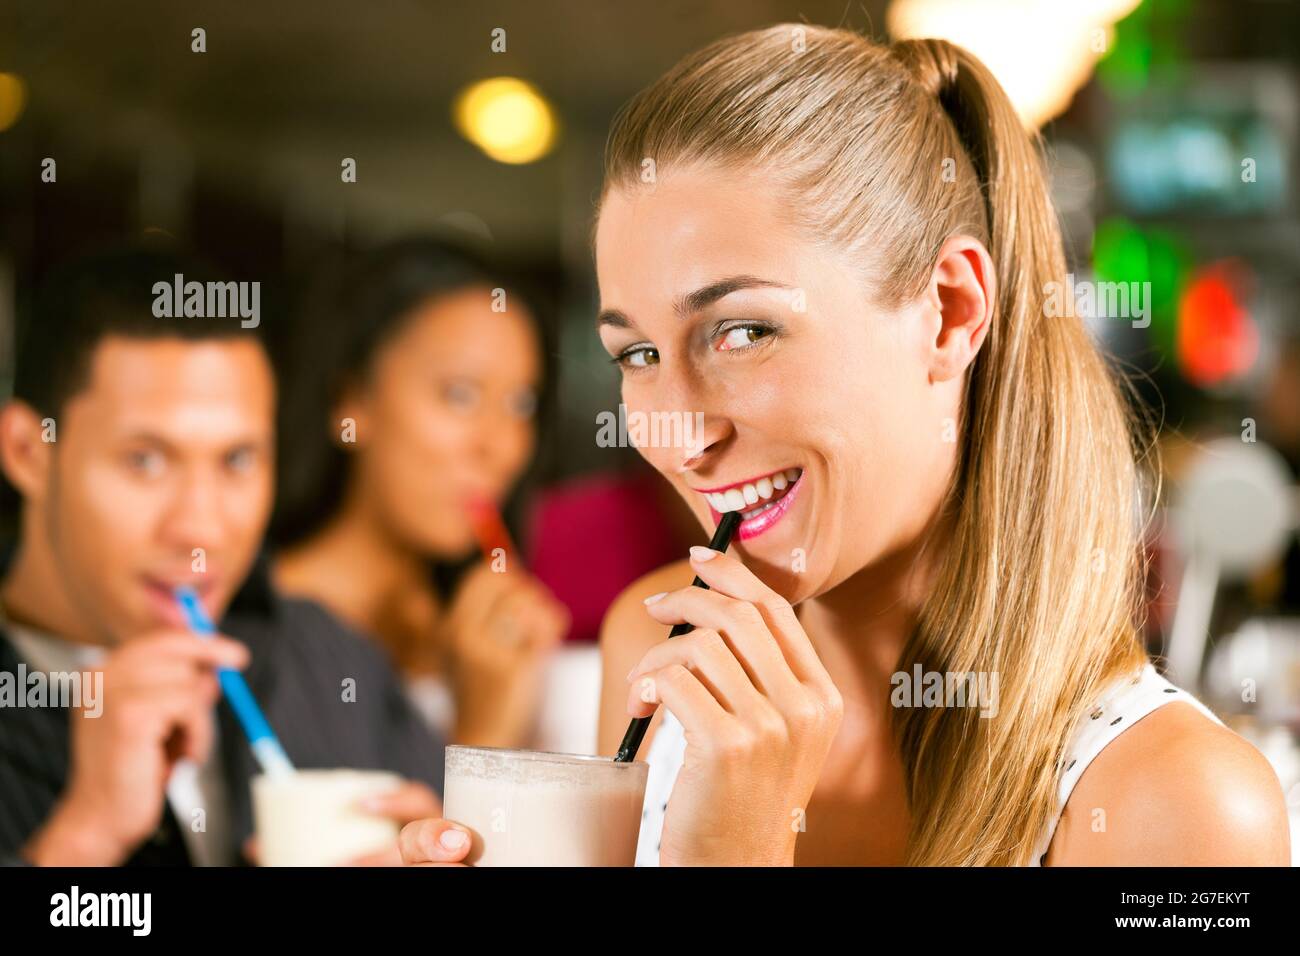 Friends drinking milkshakes in a bar and have lots of fun; focus on the woman in front Stock Photo